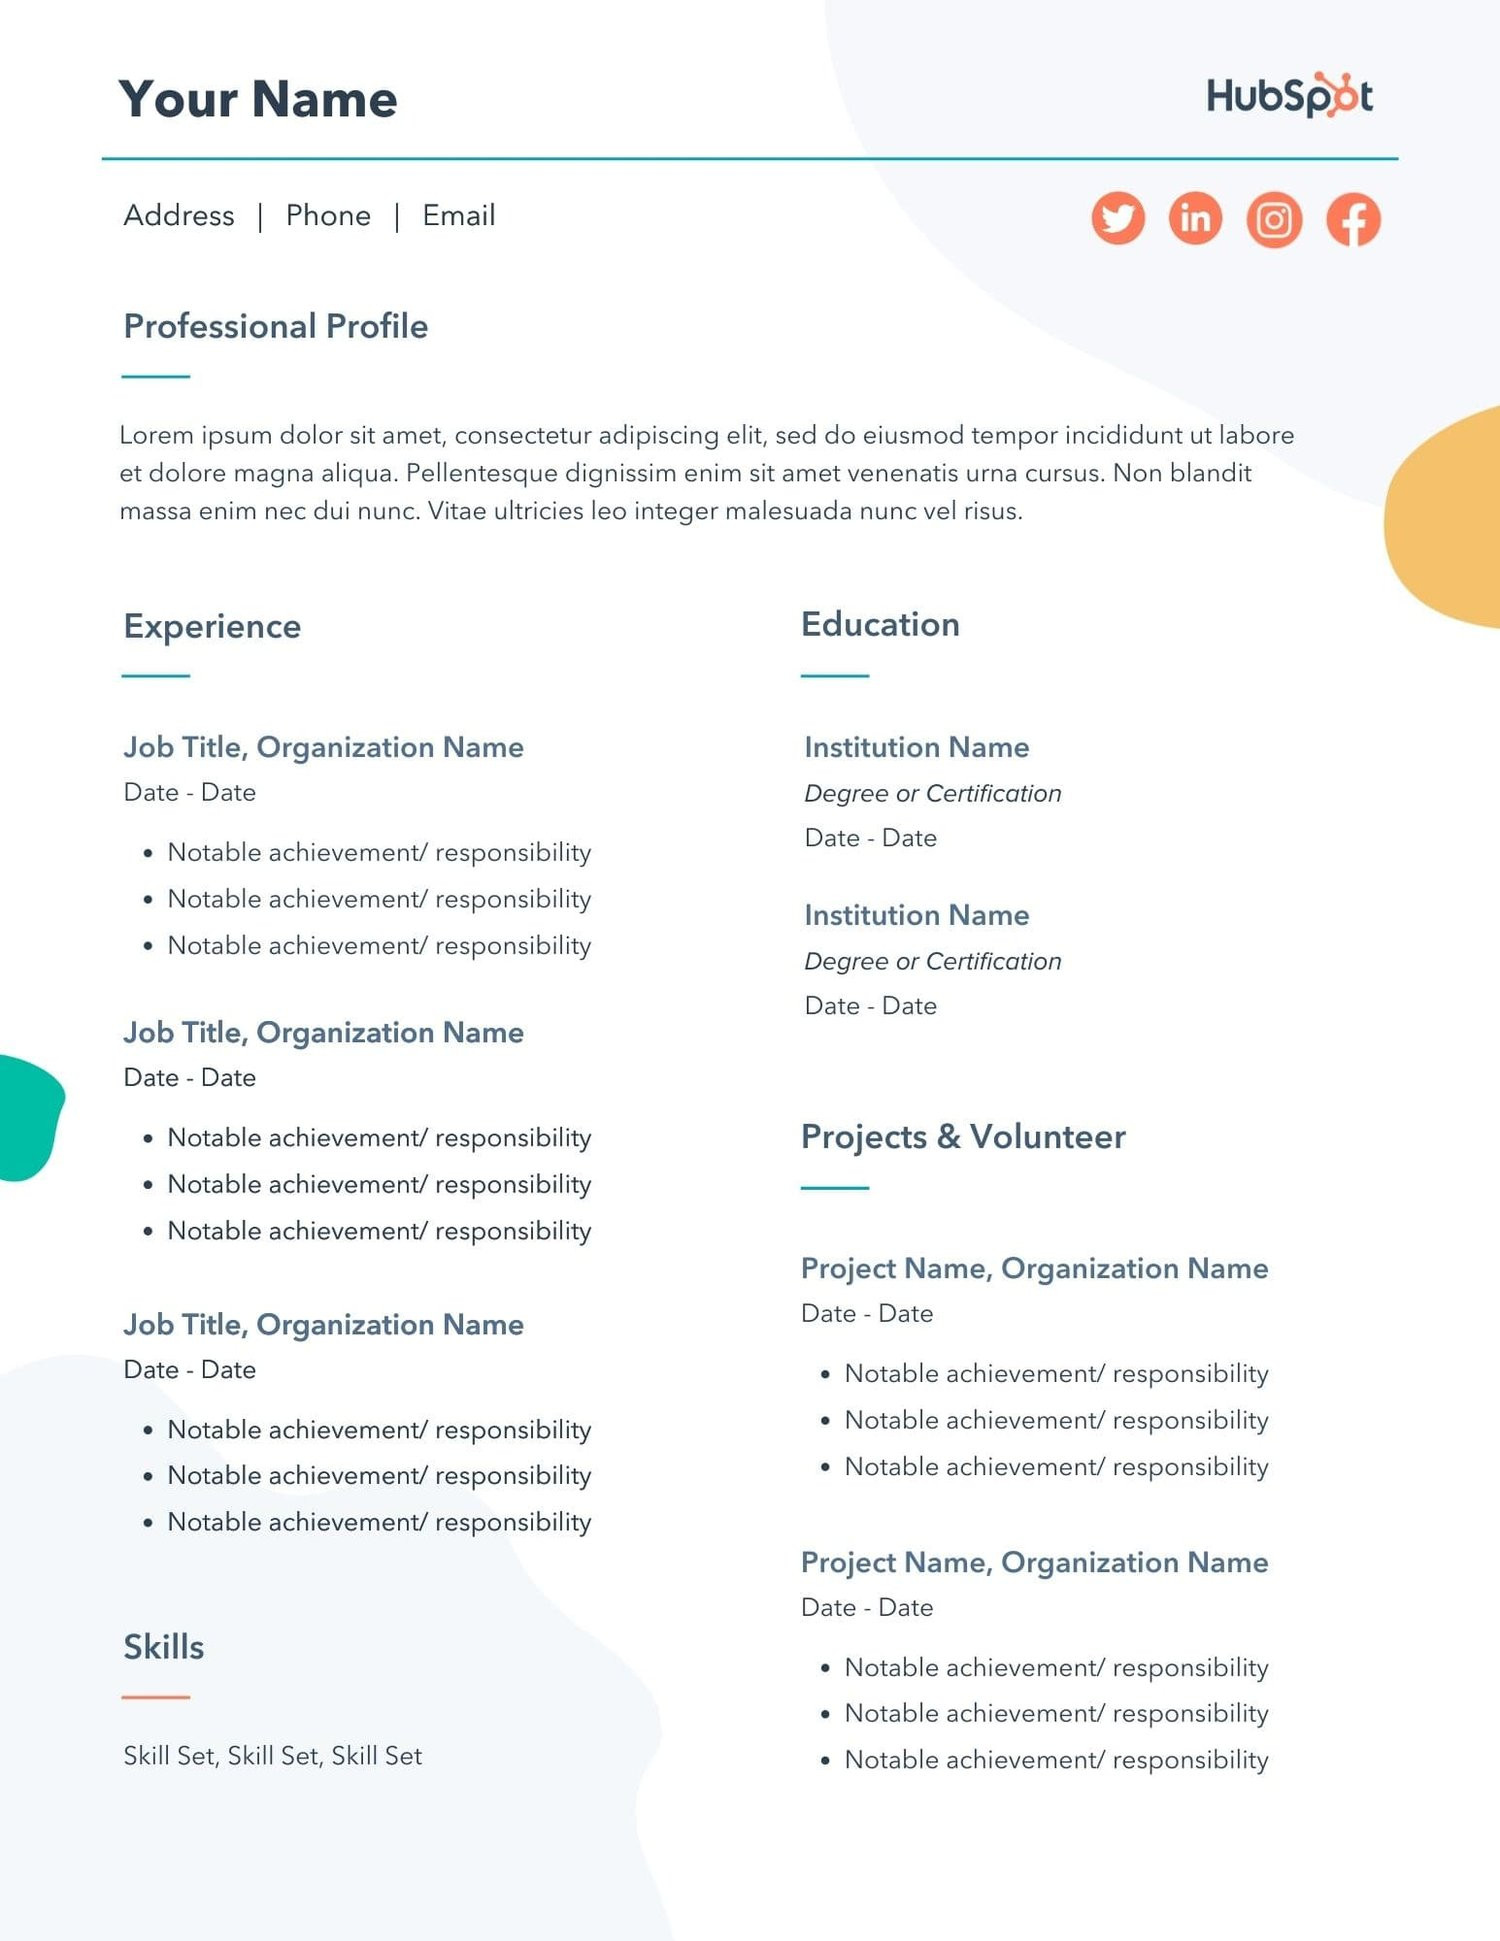 Sample Resume with Awards and Recognition 29 Free Resume Templates for Microsoft Word (& How to Make Your Own)